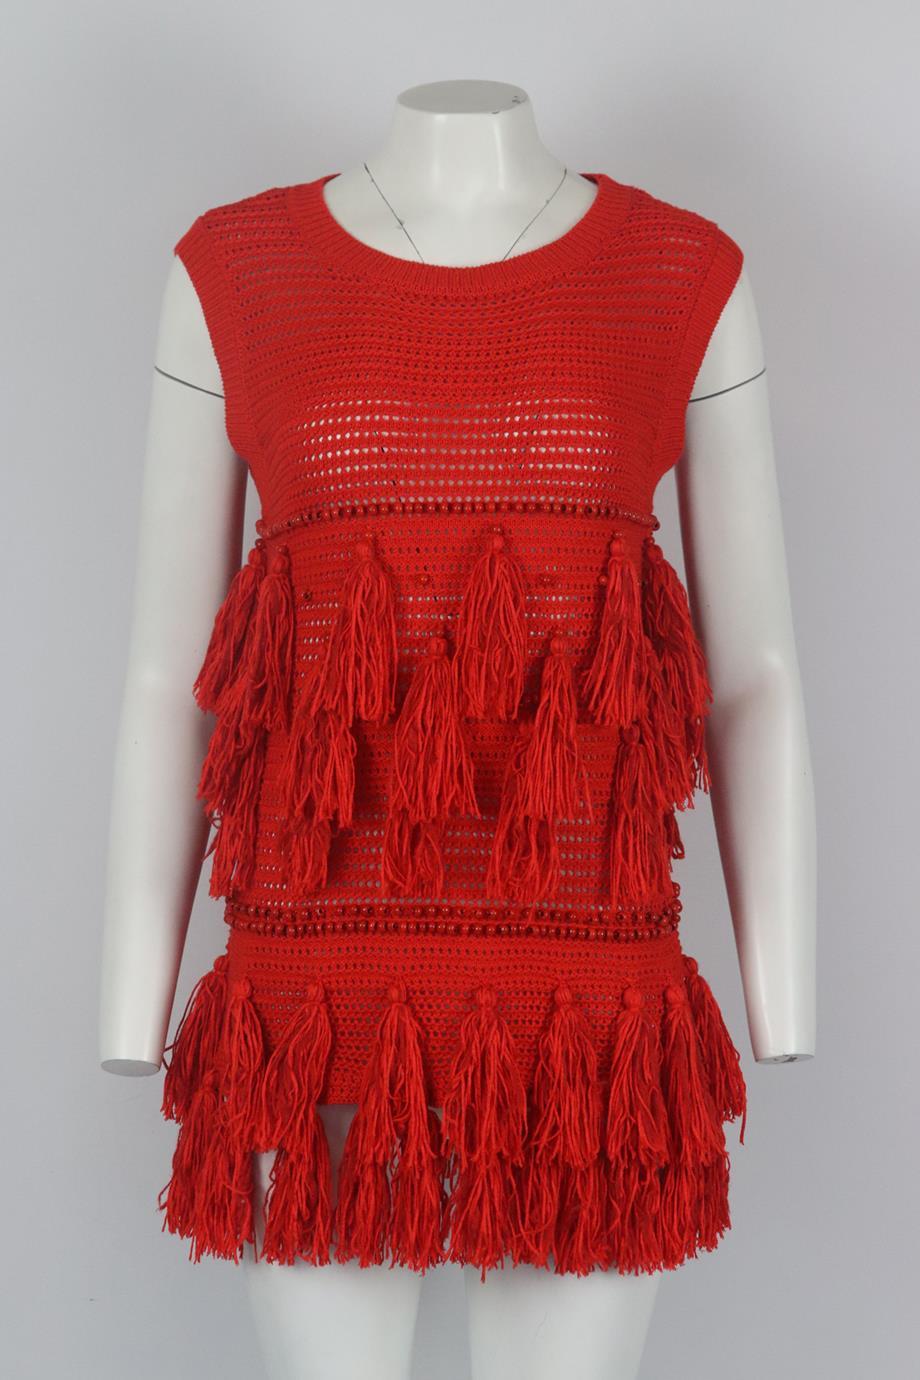 Dries Van Noten beaded tasselled crochet knit top. Red. Sleeveless, crewneck. Slips on. 100% Acrylic. Size: Medium (UK 10, US 6, IT 42, FR 38). Bust: 35 in. Waist: 35 in. Hips: 41 in. Length: 24 in. Very good condition - No sign of wear; see